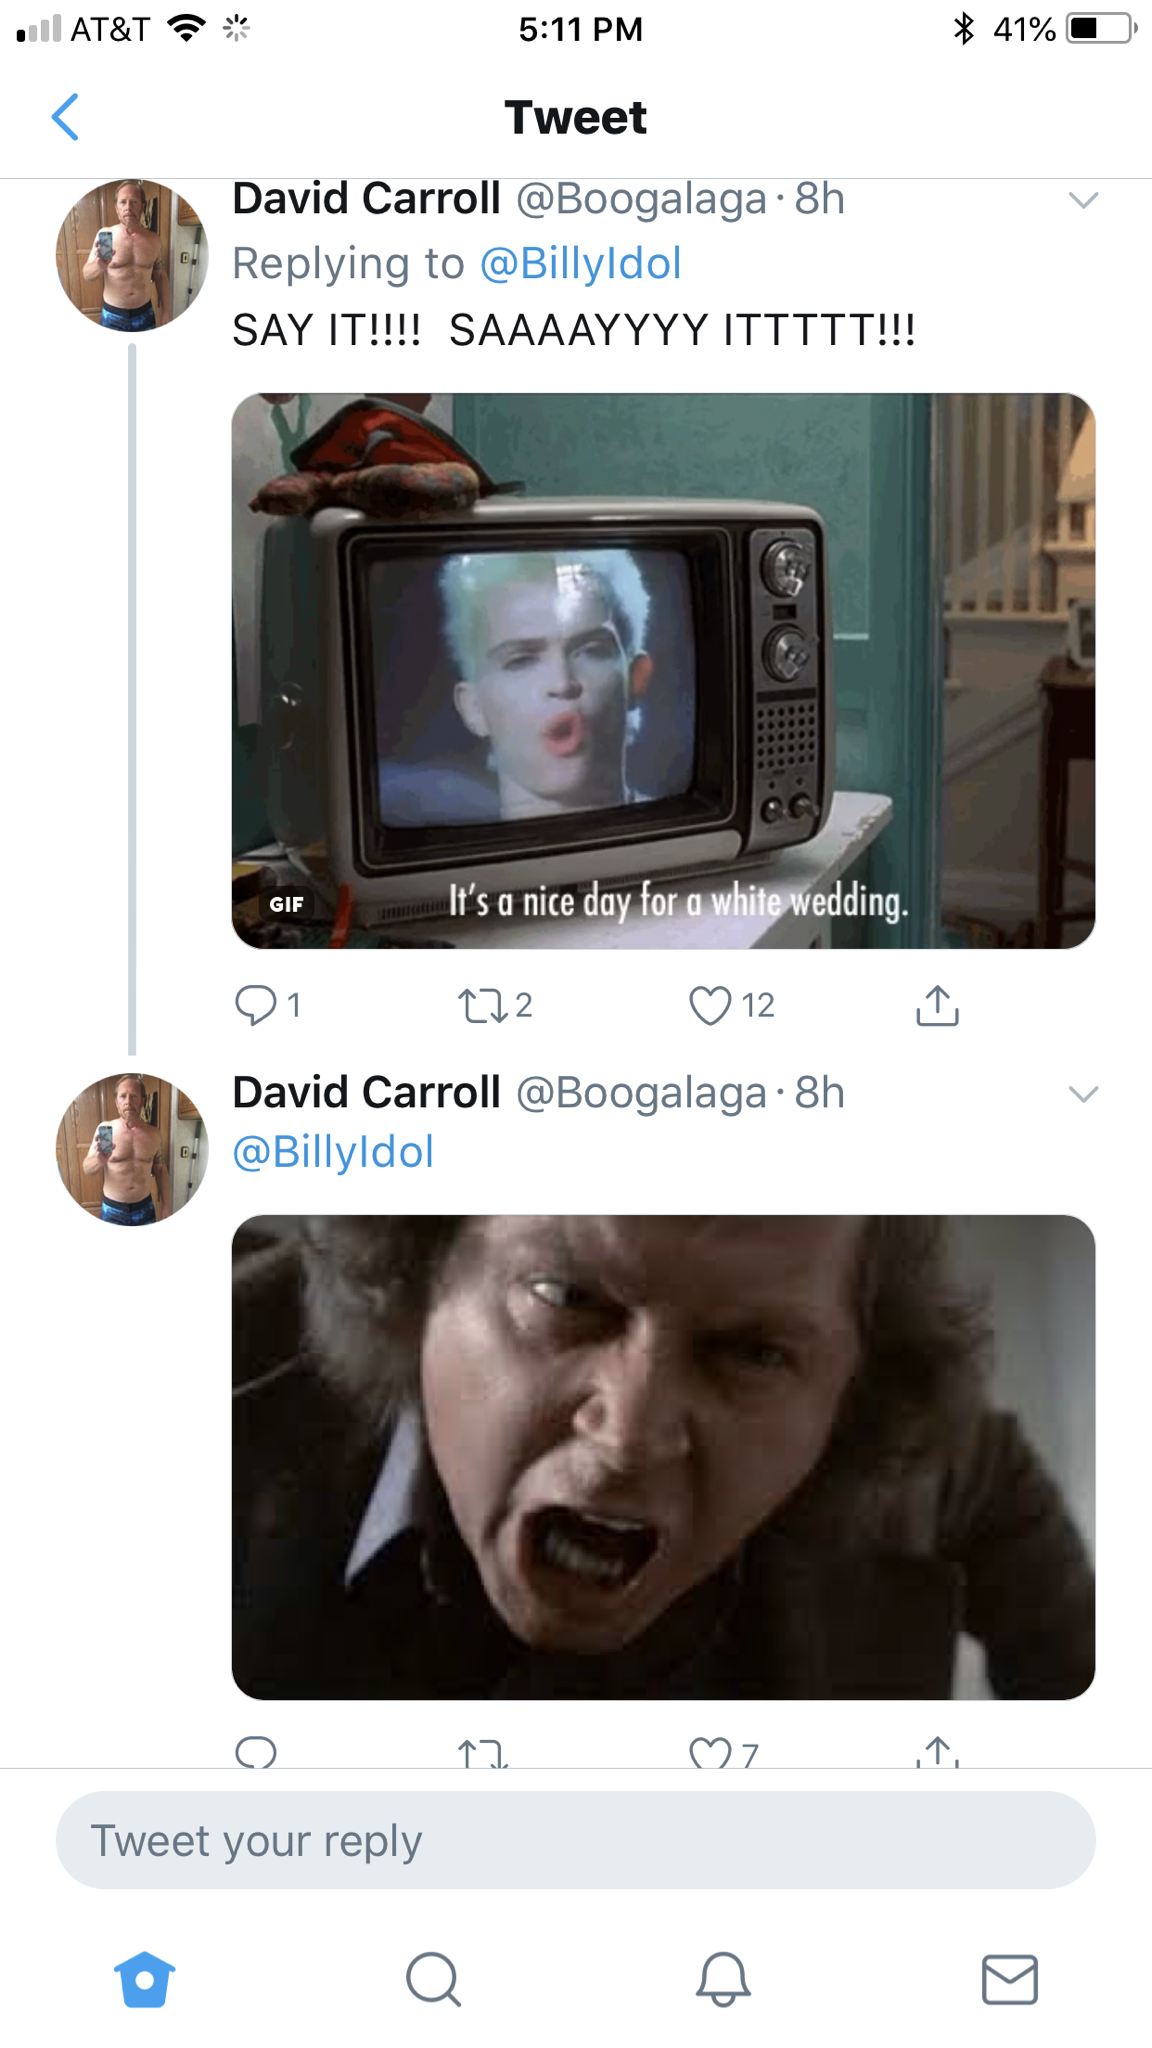 Billy Idol Misses The Opportunity For The Perfect Royal Wedding Reference But His Fans Didn't